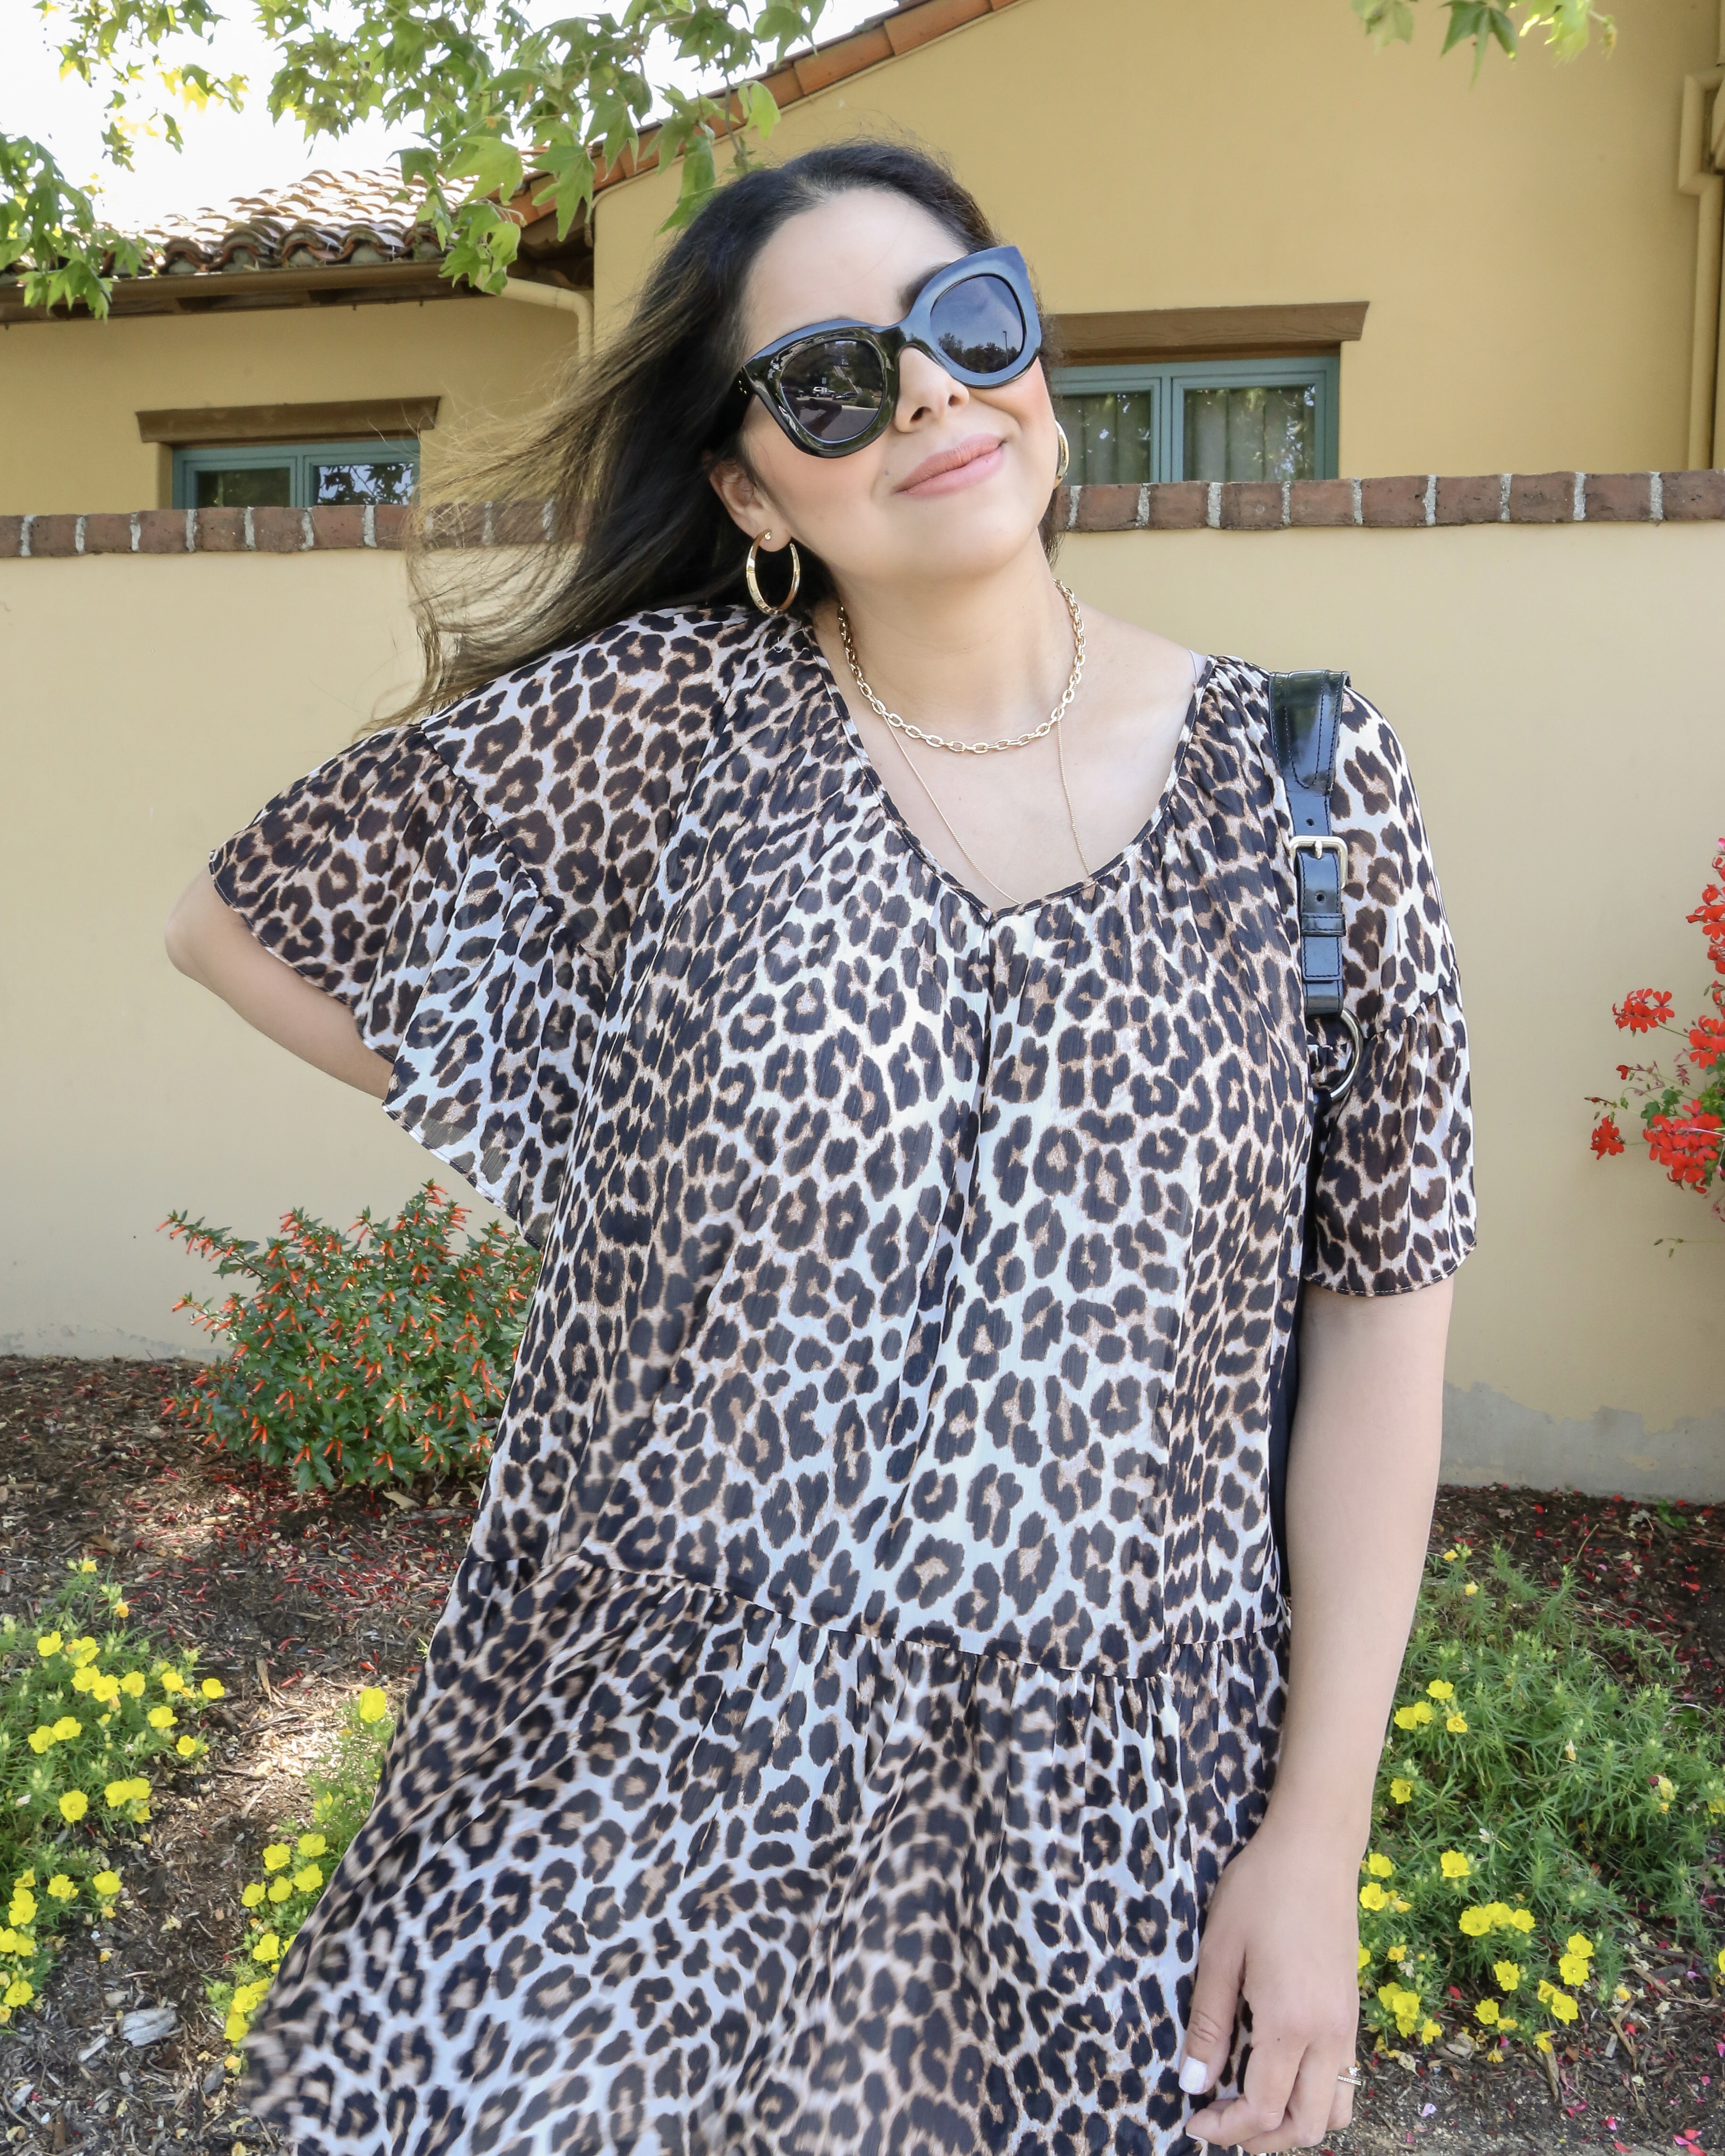 How to style a leopard dress for summer, animal prints for summer dresses